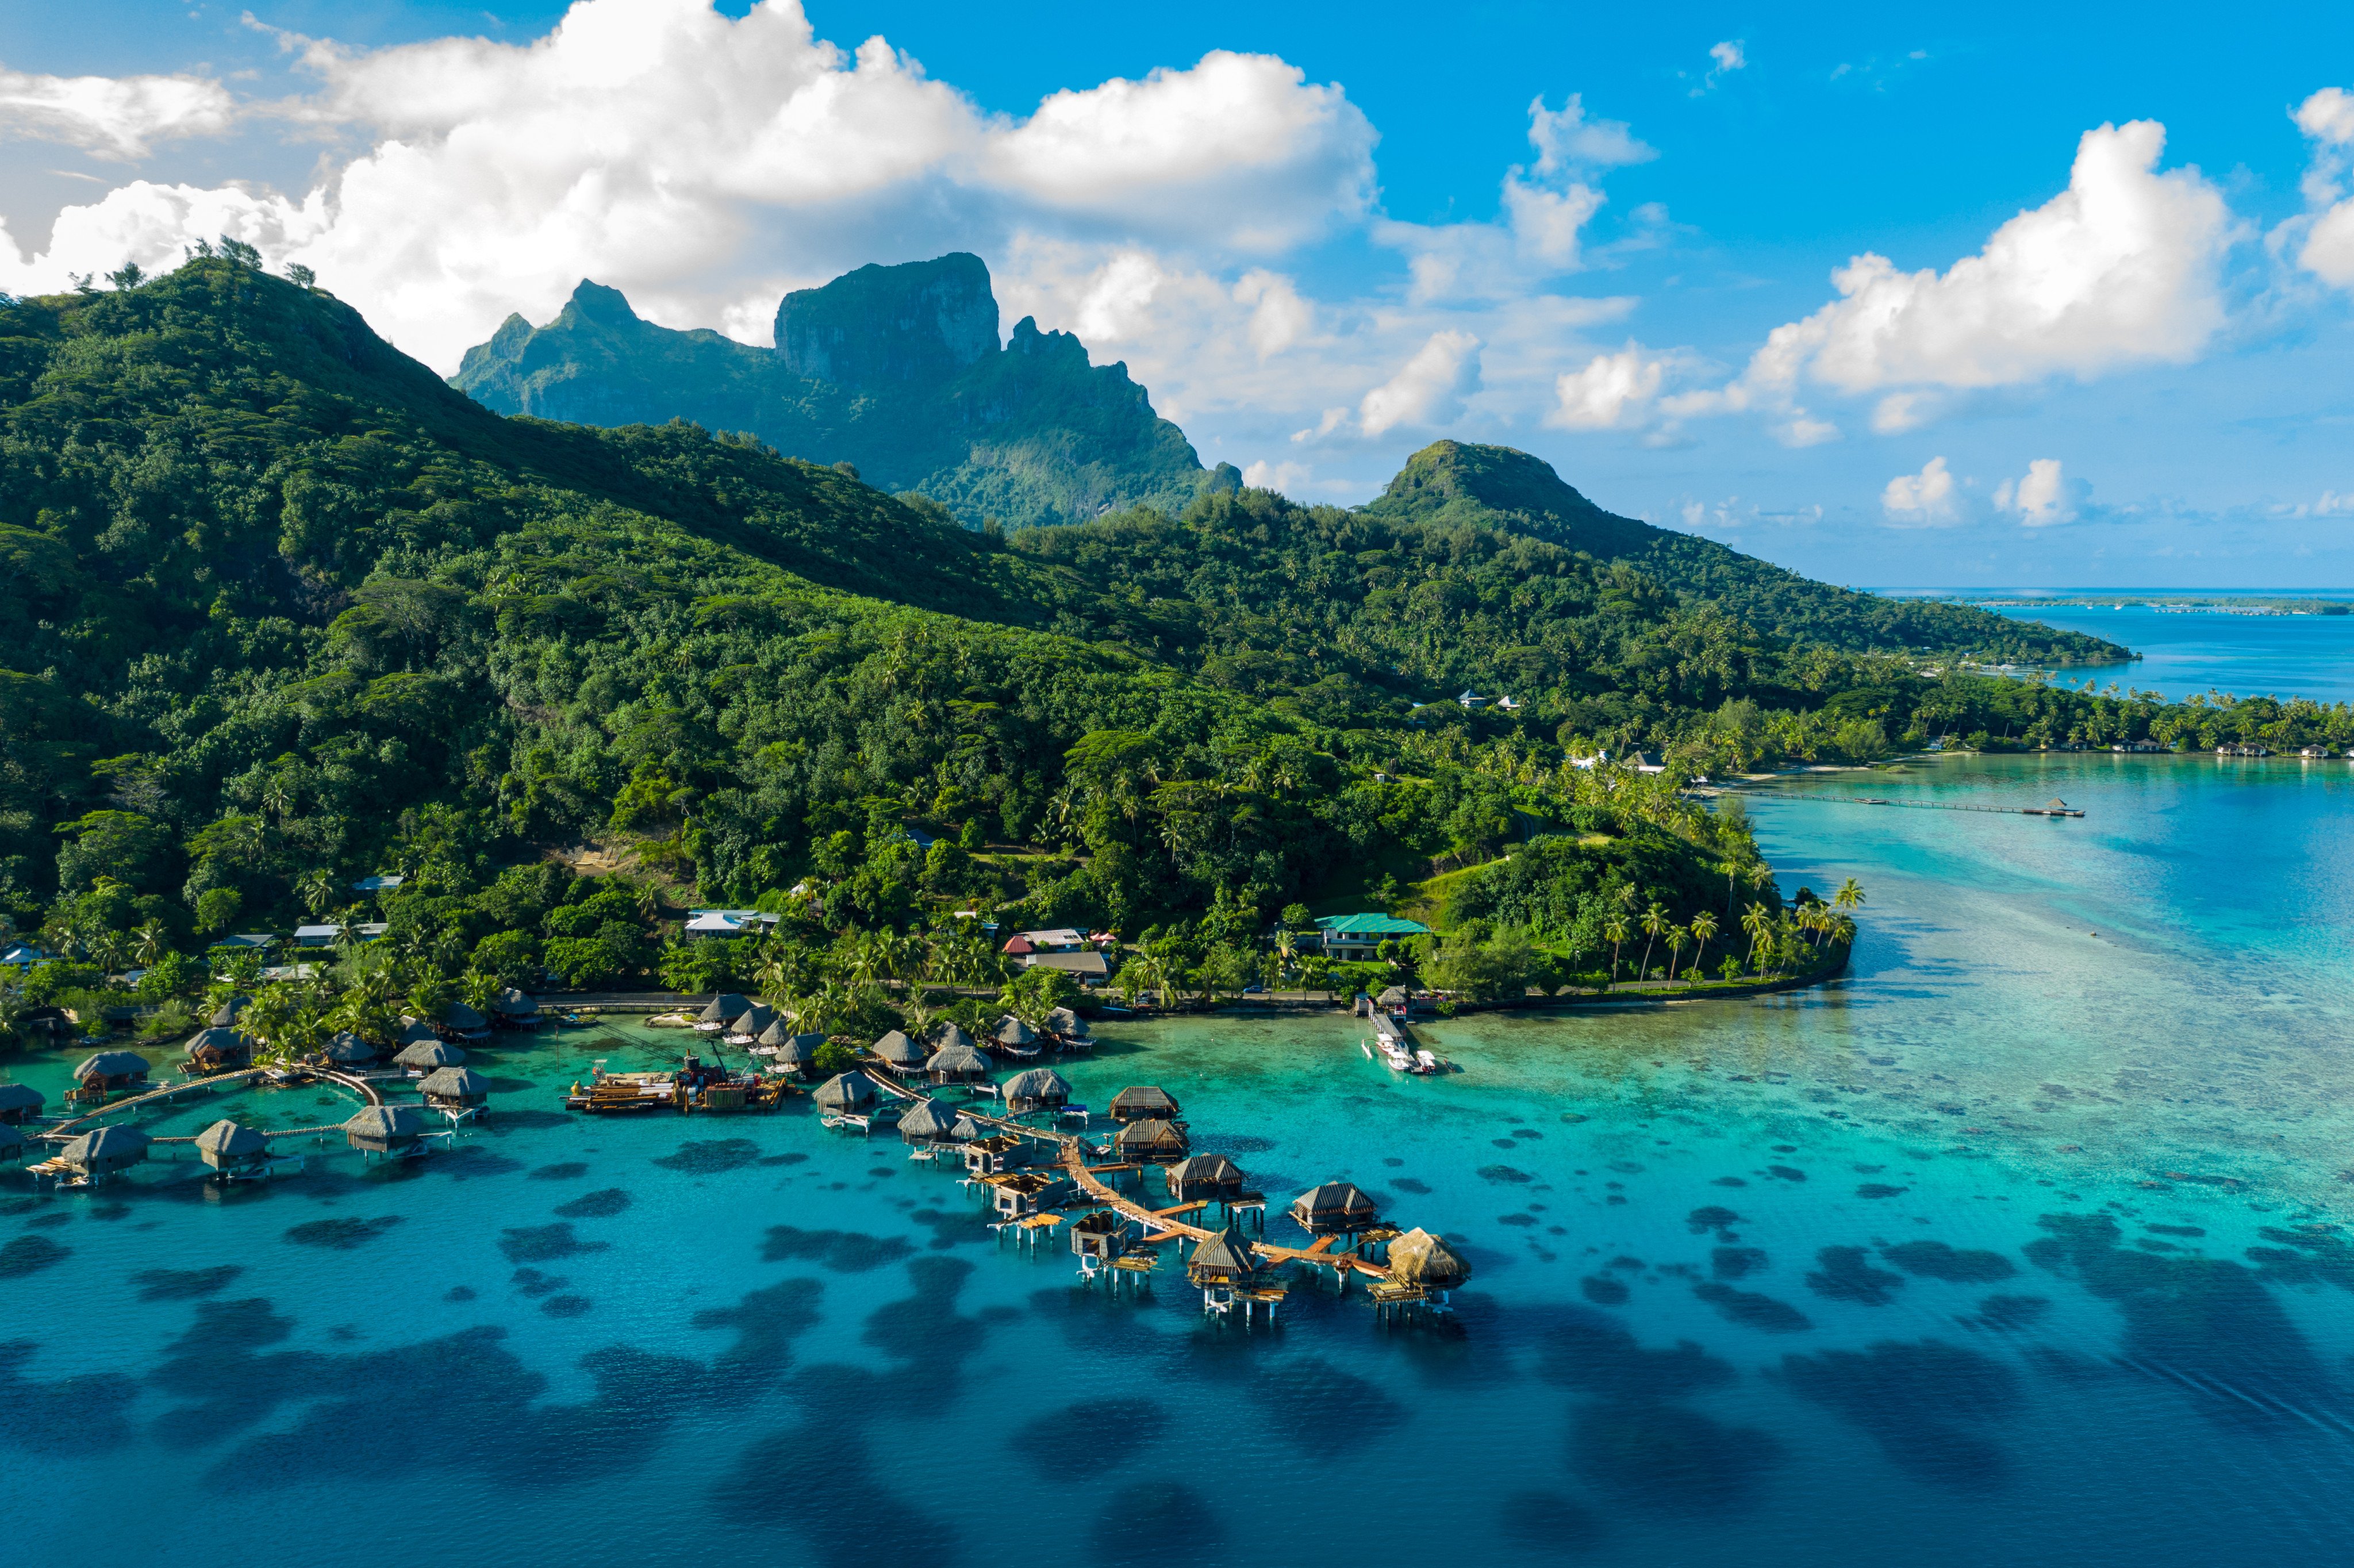 The 2024 Olympic surfing events will be held in Tahiti. Photo: Shutterstock